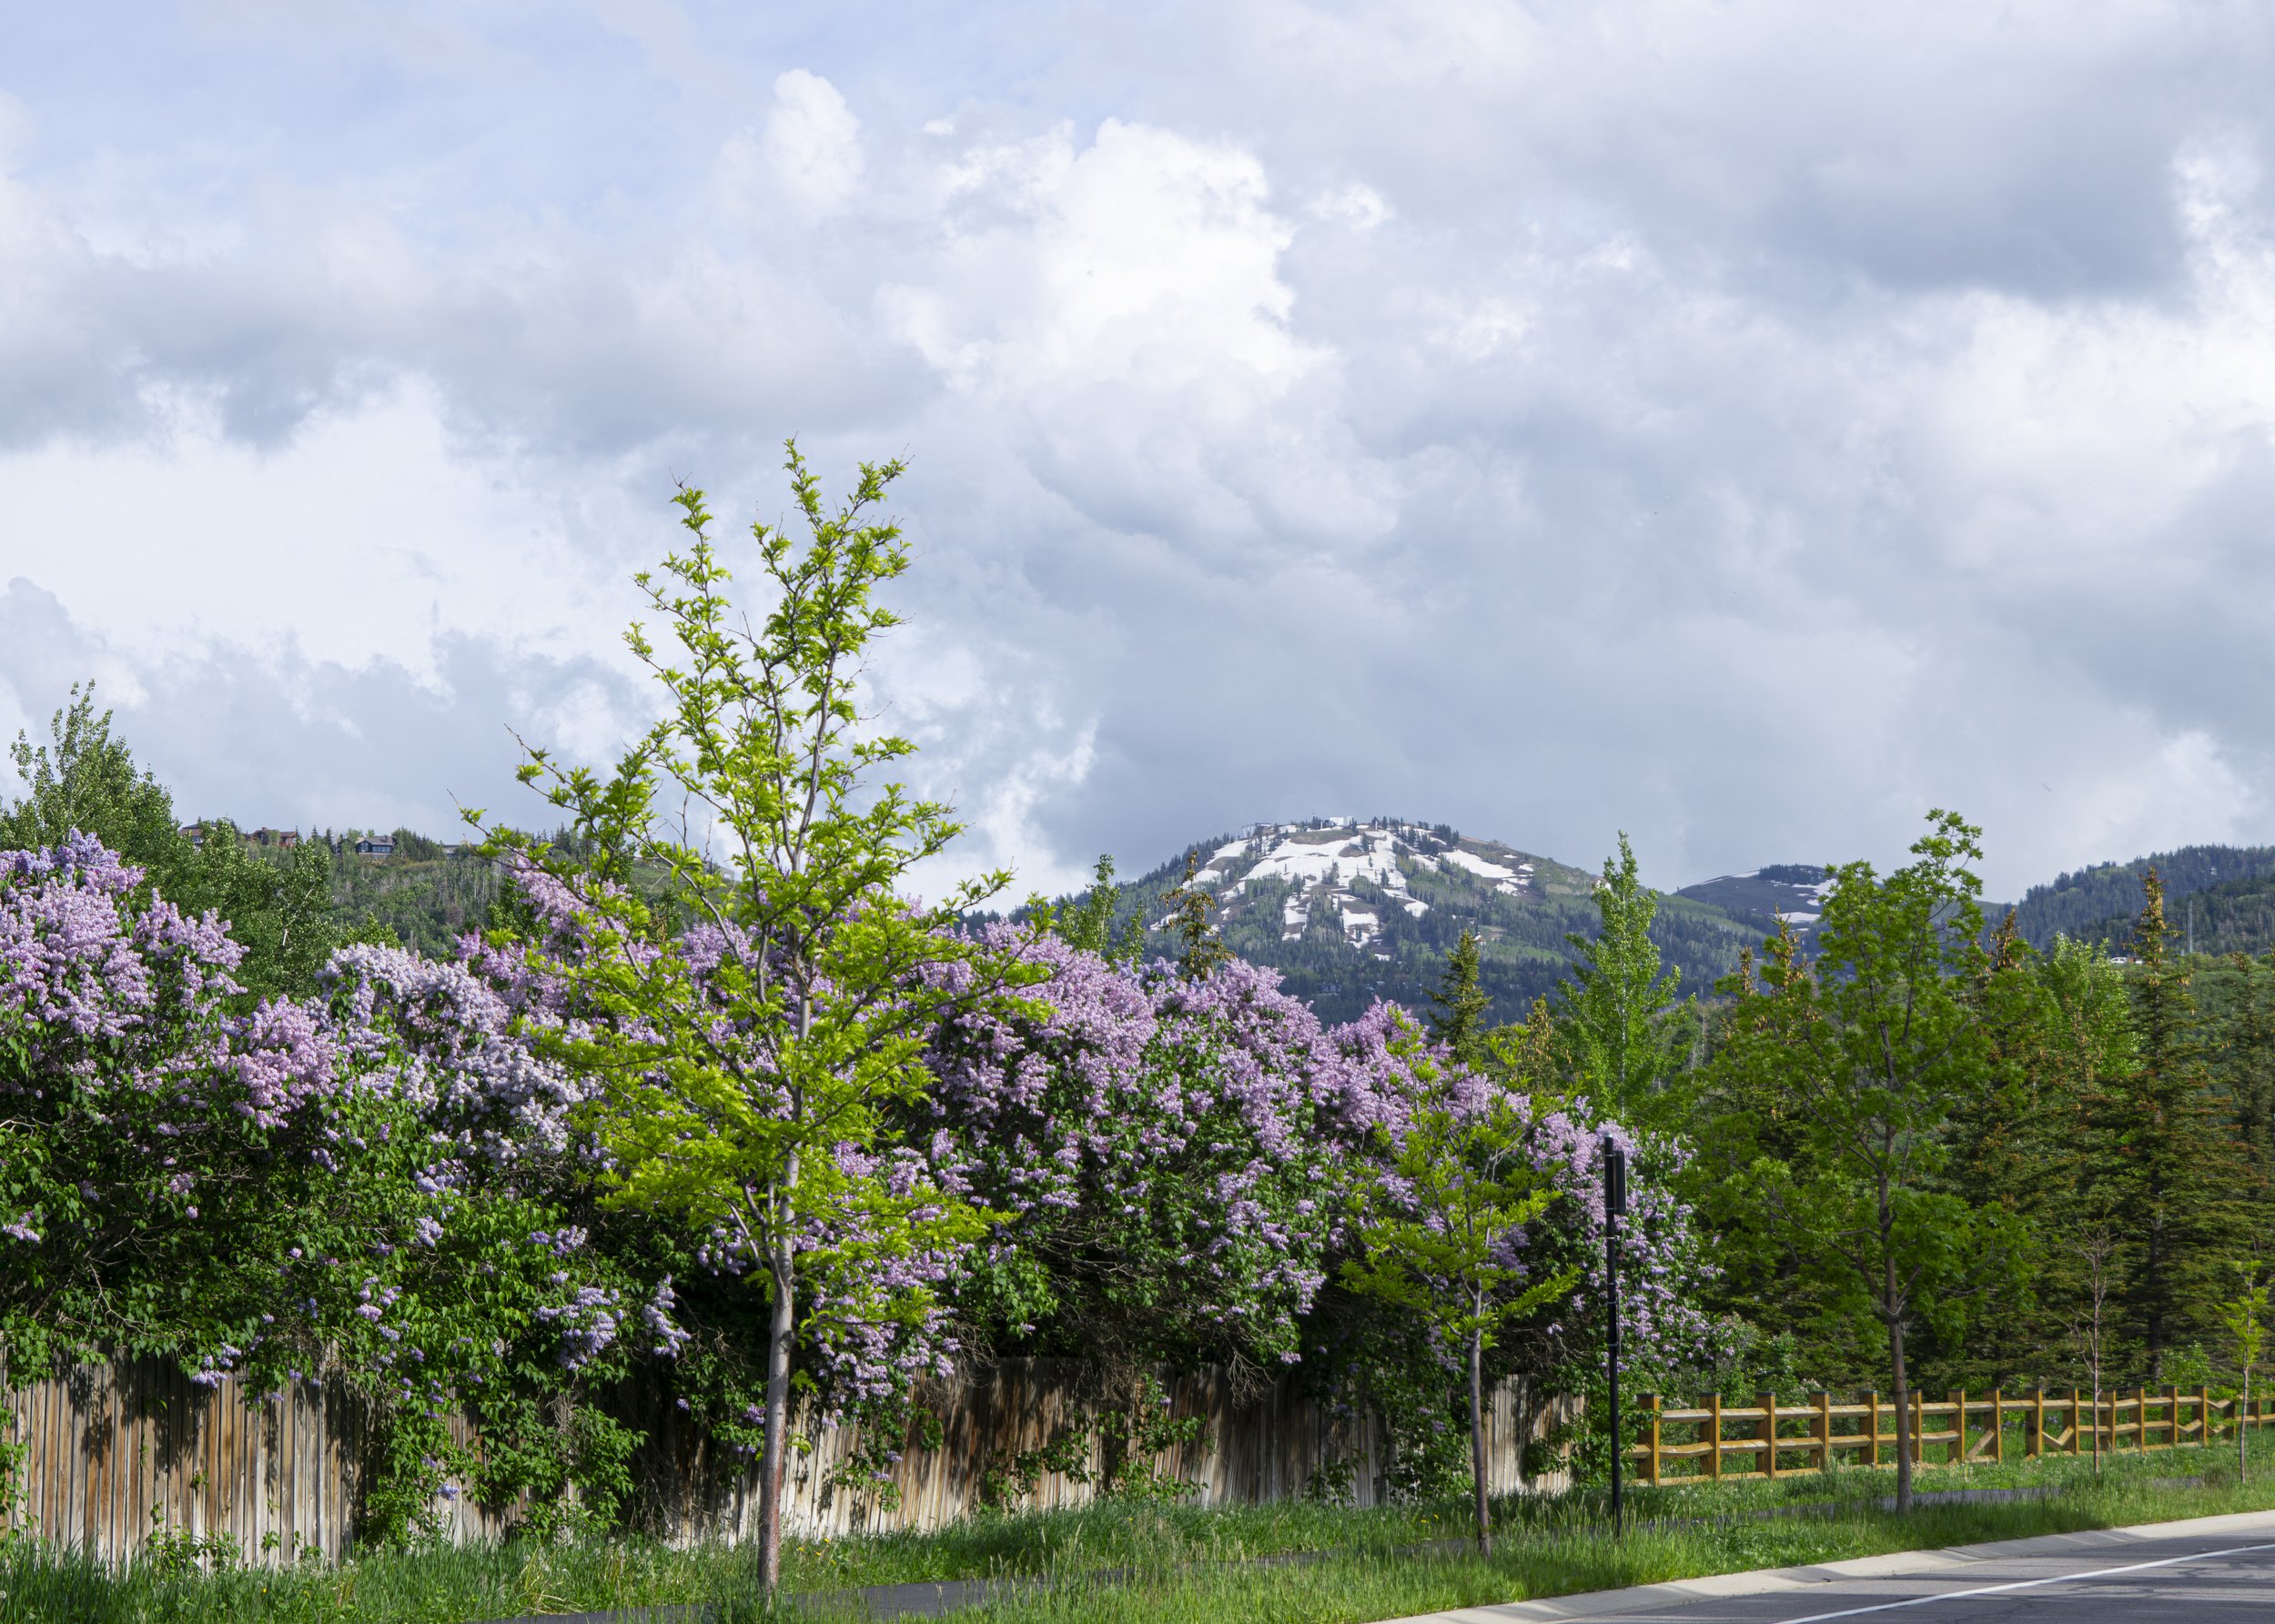 Lilacs and Snow with Fence, June 2023